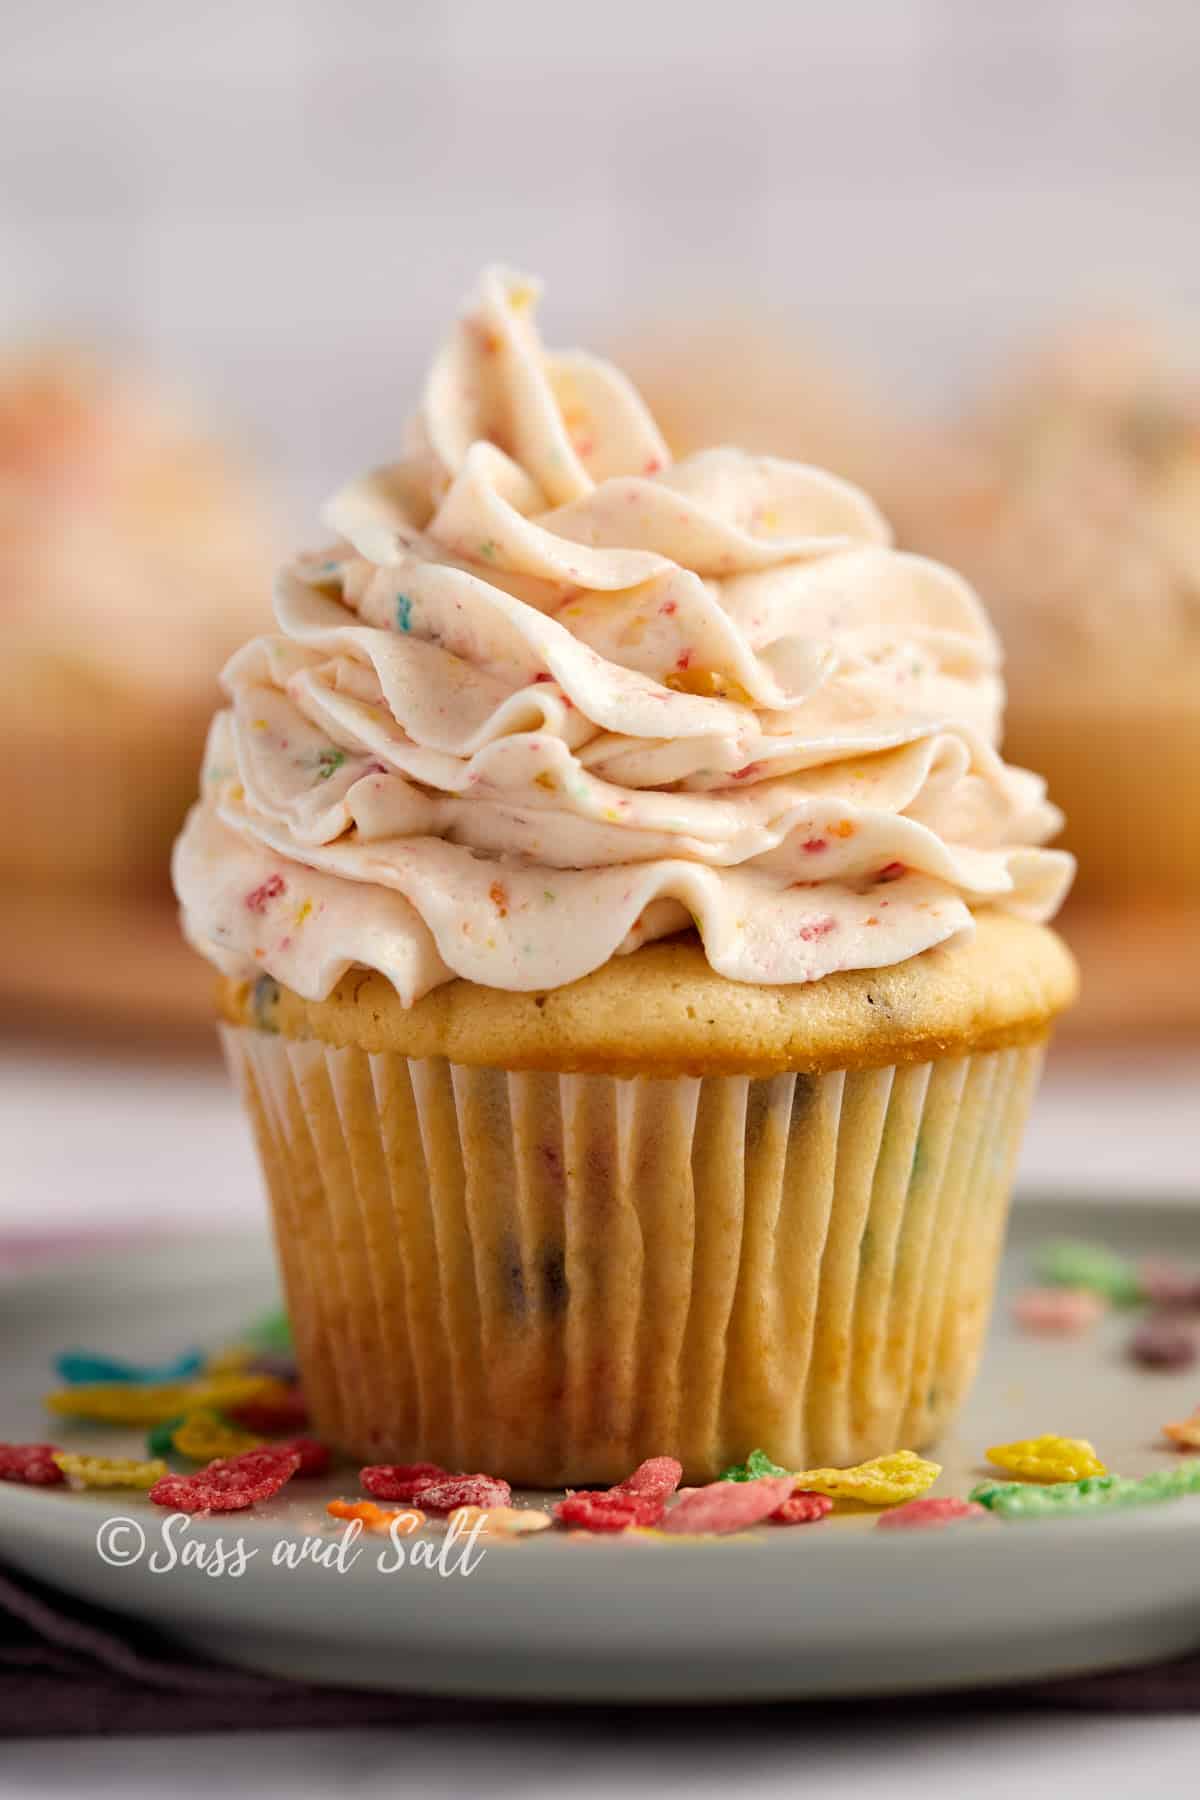 A Fruity pebbles  cupcake topped with a generous swirl of Fruity Pebbles-infused buttercream frosting, presented on a plate with Fruity Pebbles scattered around.